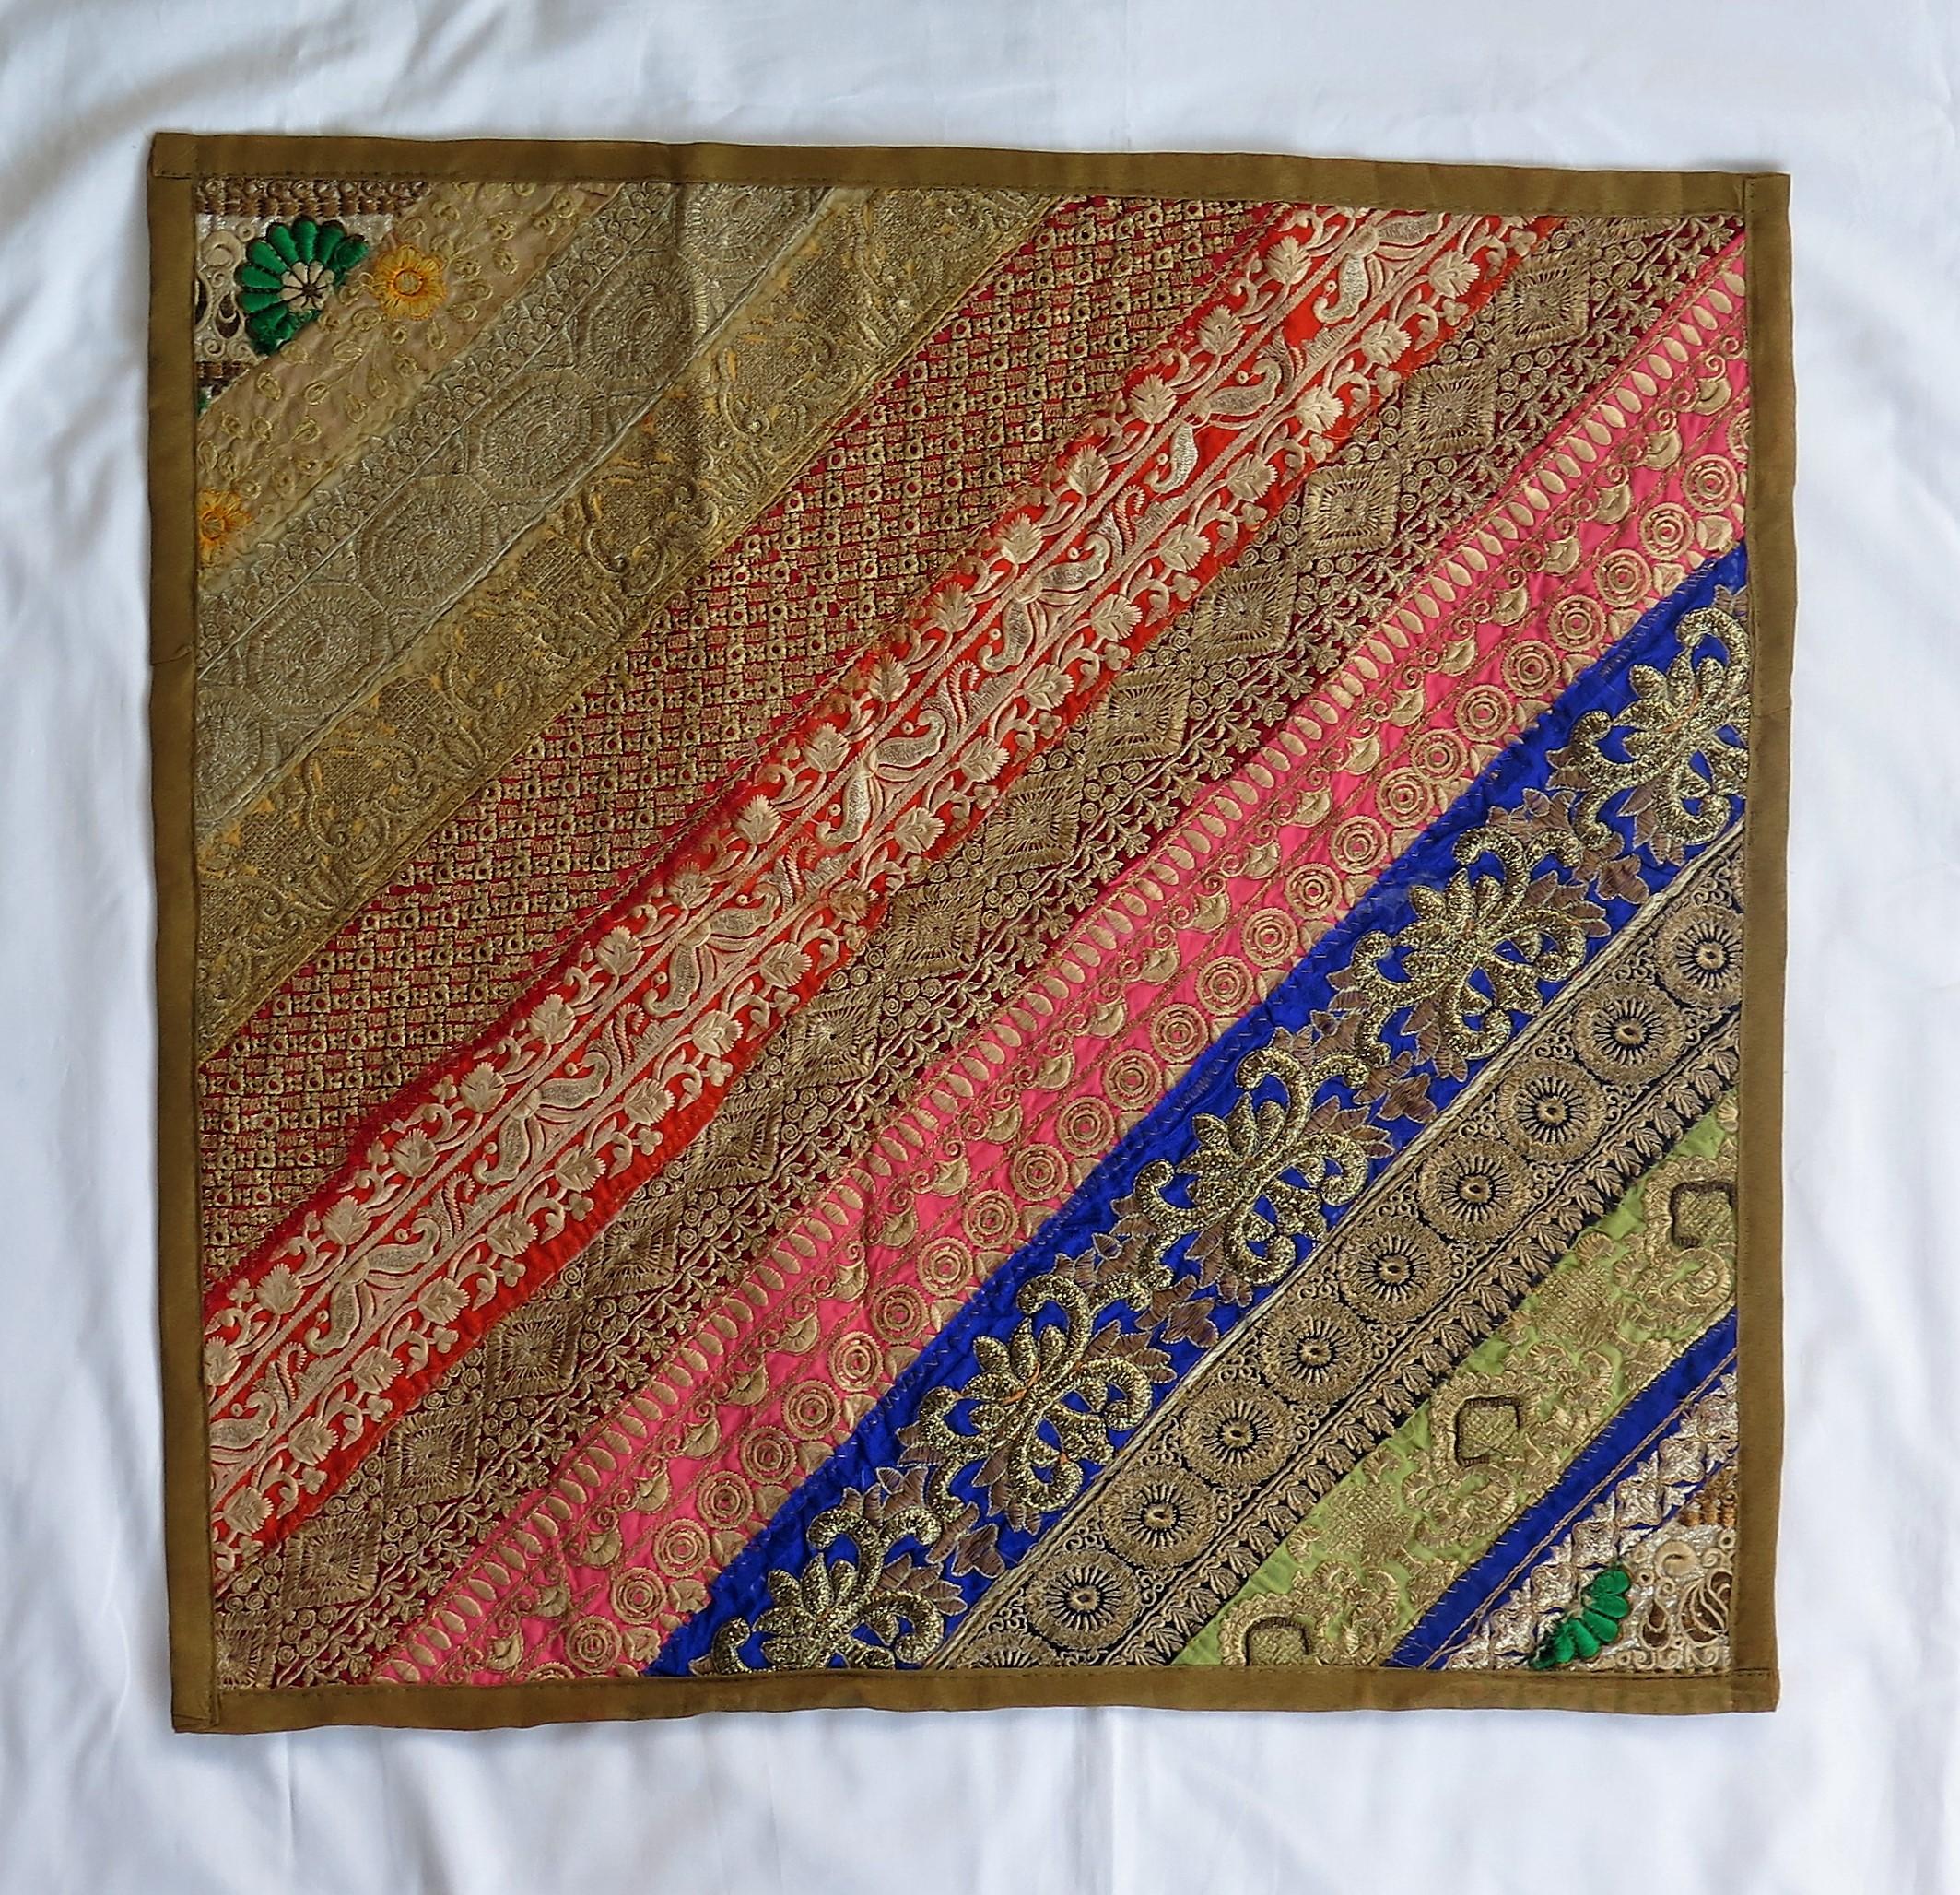 This is a dazzling colorful large, 24 x 24 inch pillow or cushion cover ( or wall hanging) all hand-worked from fabric strips of vintage sari's and other coverings in the traditional manner from India, Asia. 

The piece would probably have